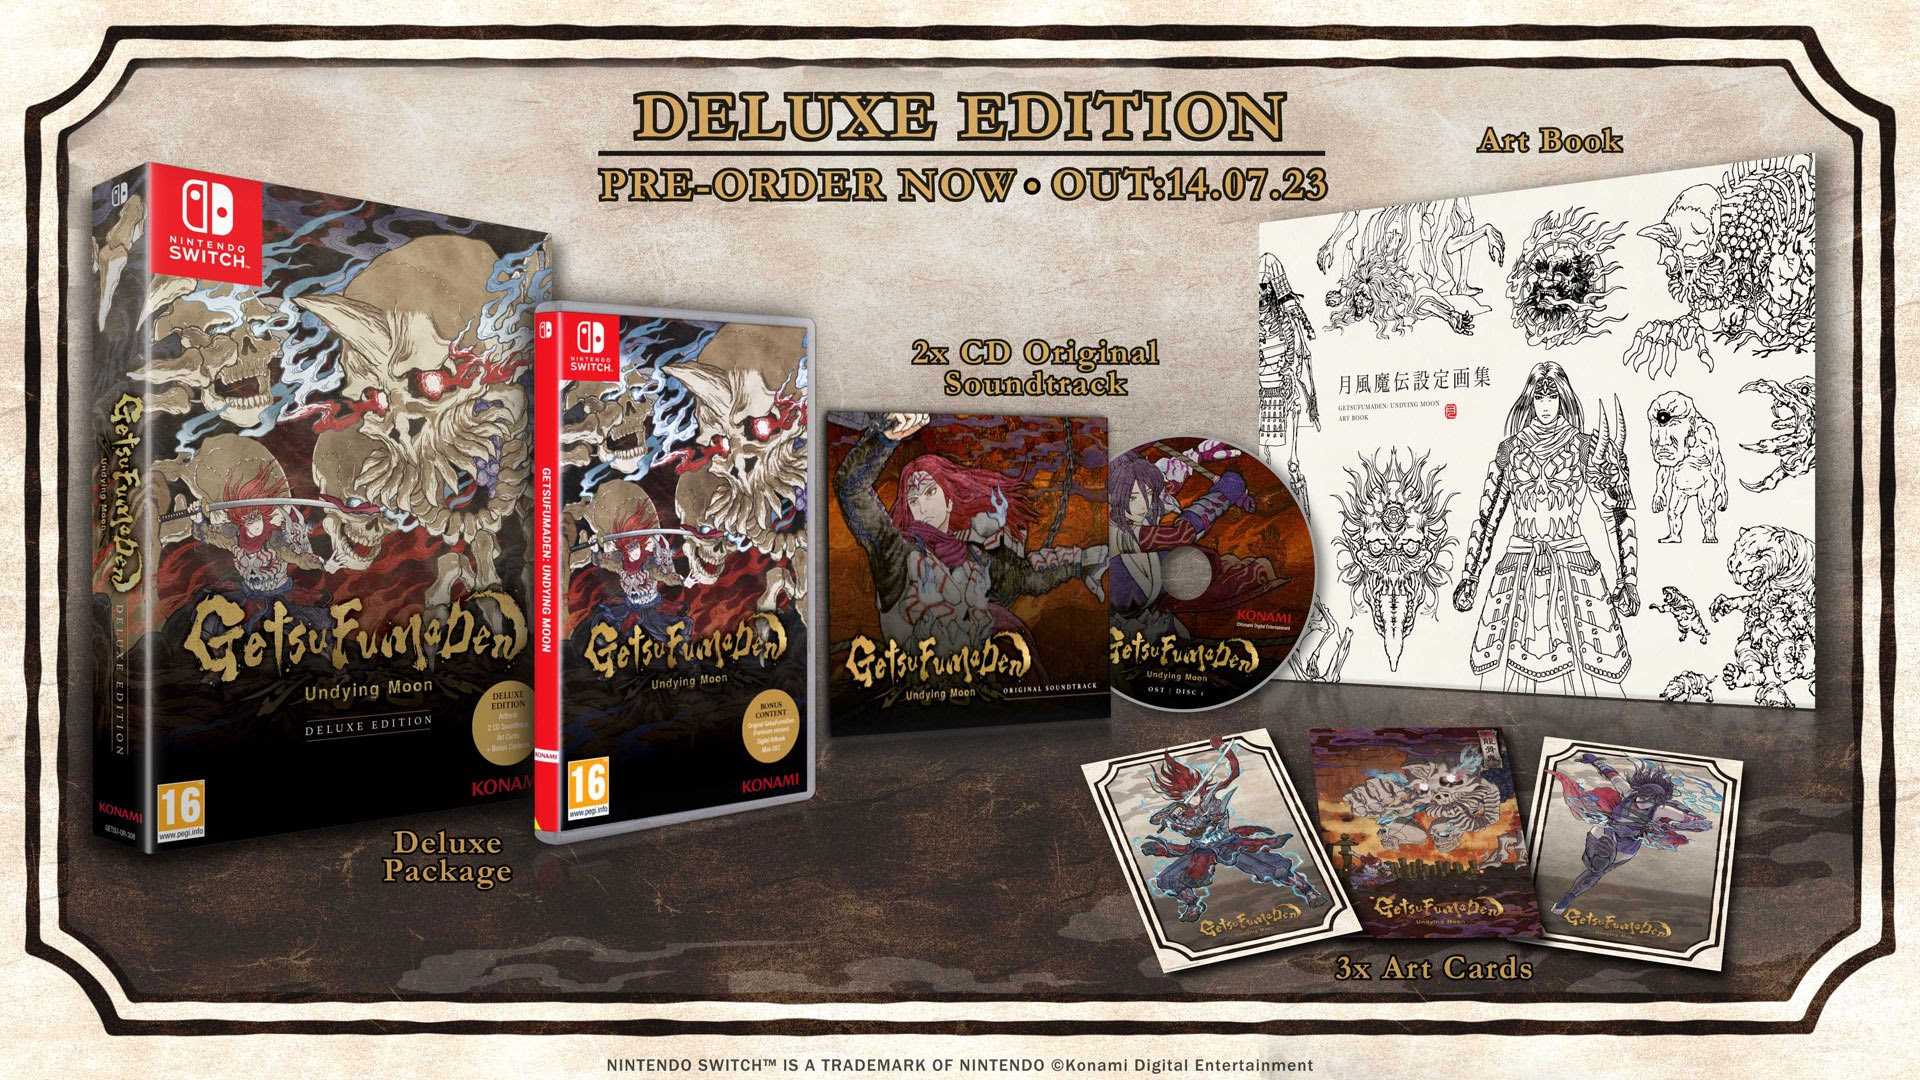 GetsuFumaDen: Undying Moon éditions Deluxe